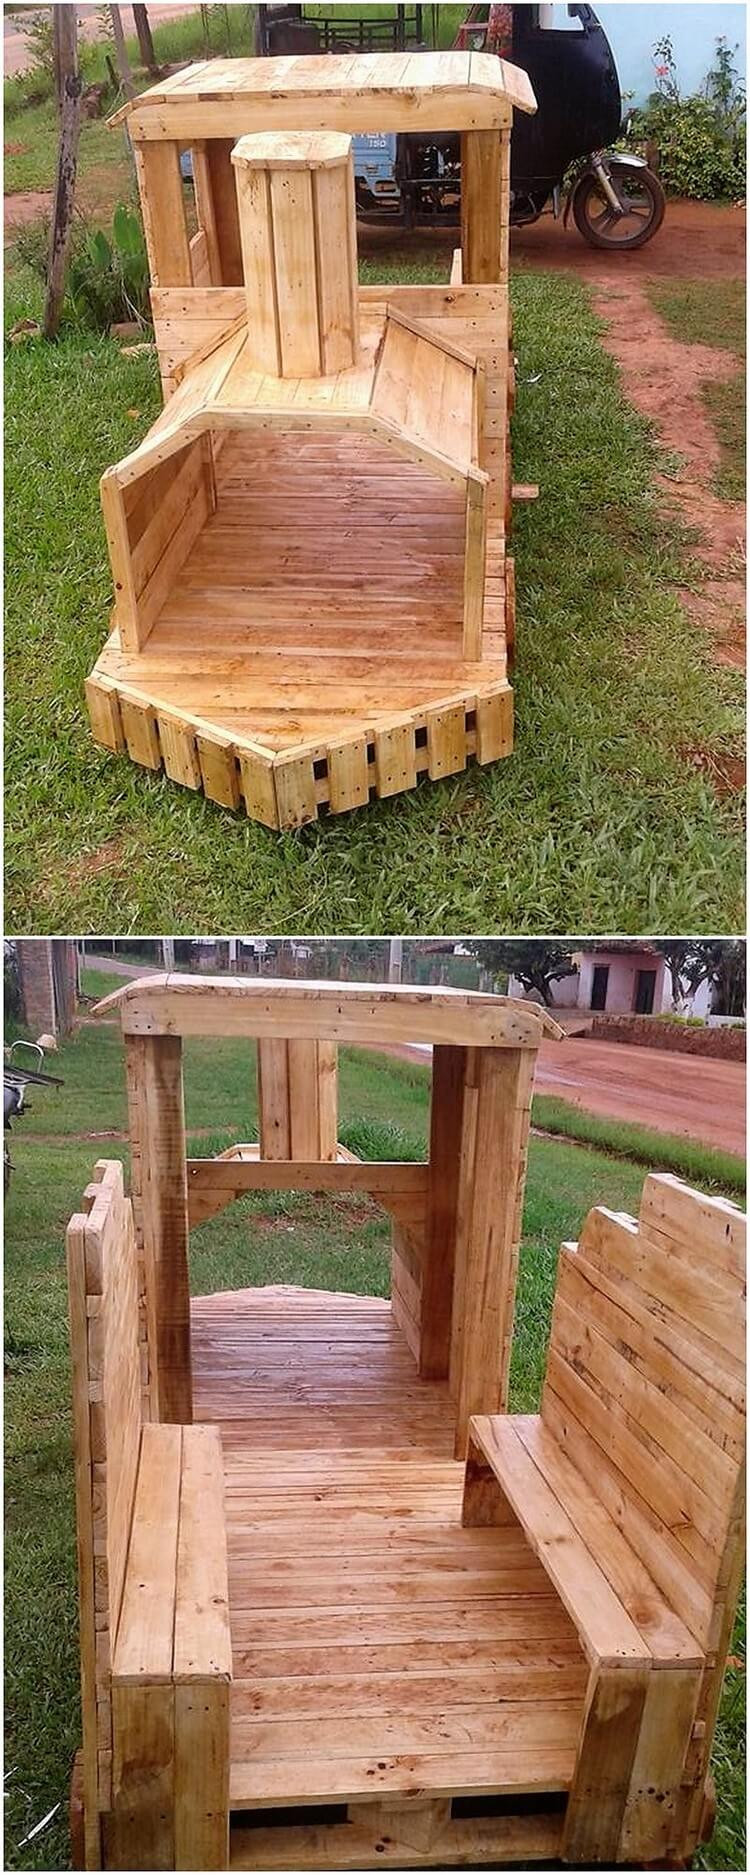 DIY Pallet Project Plans
 Splendid DIY Recycled Wood Pallet Creations